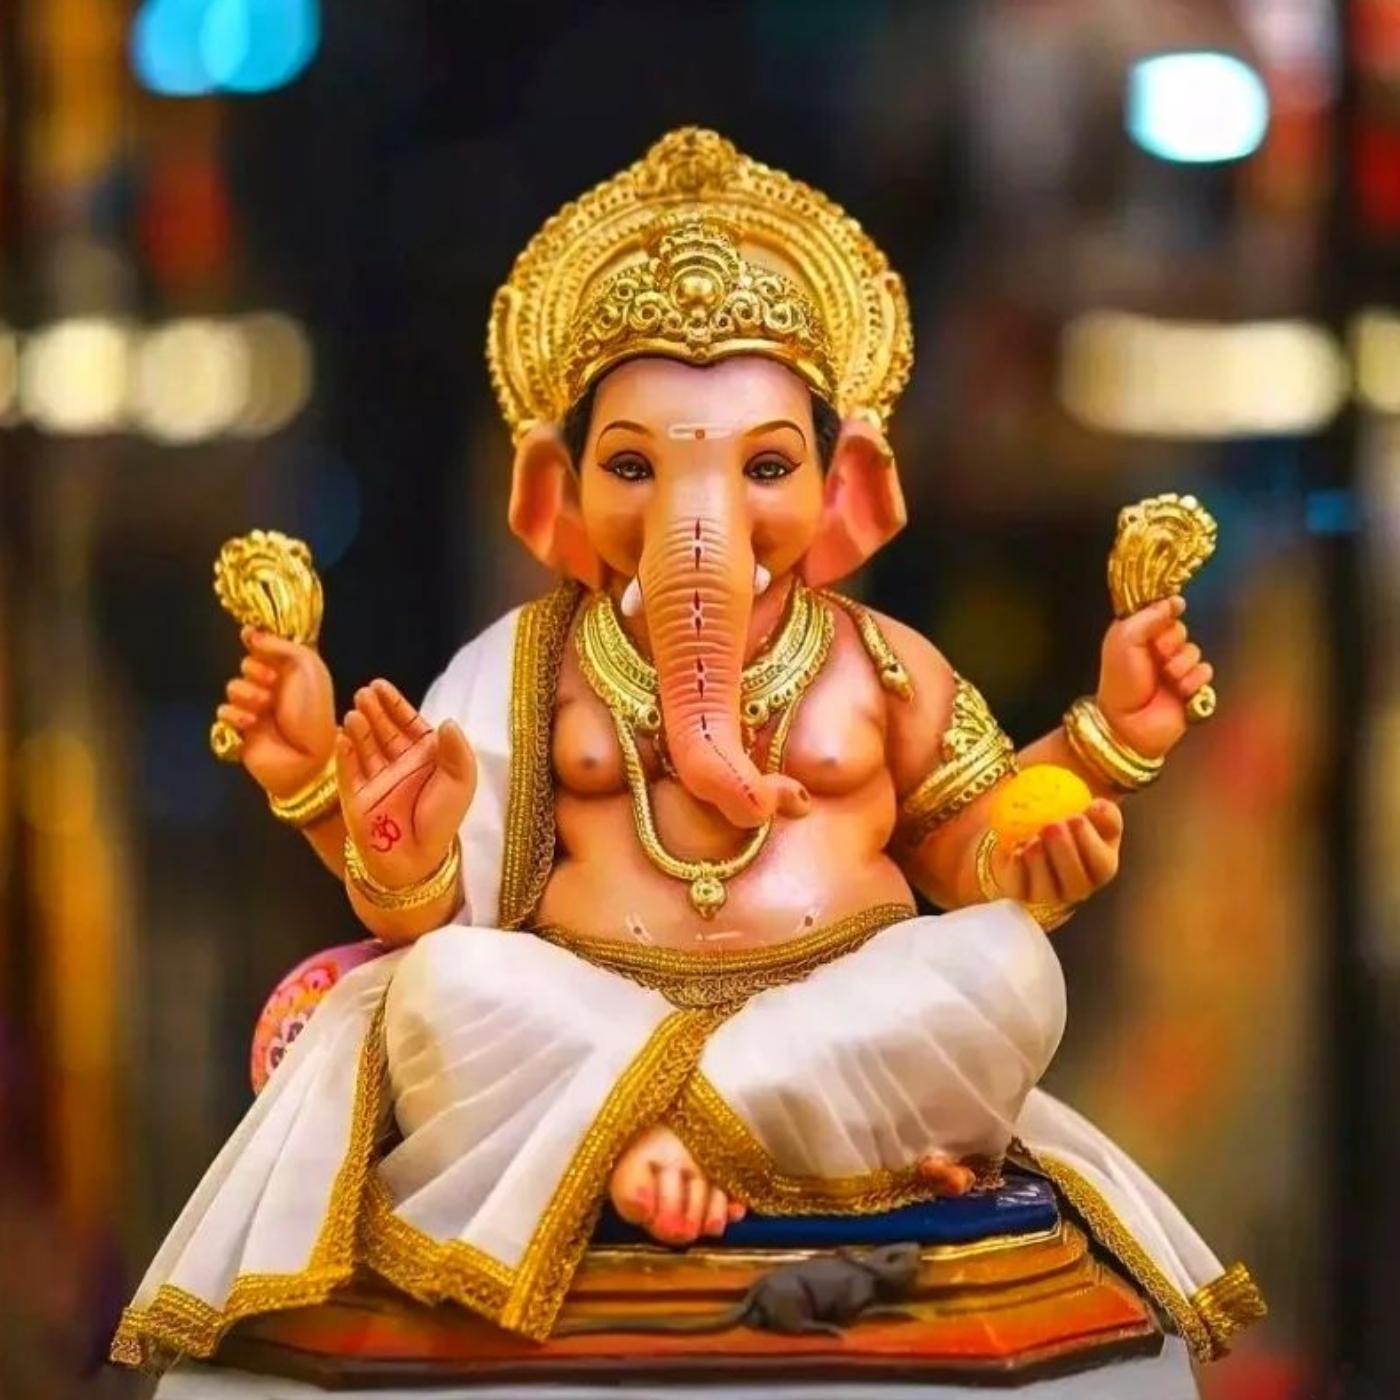 Download Ganpati Bappa wallpaper by AdiWanted  a2  Free on ZEDGE now  Browse millions of popula  Ganpati bappa wallpapers Ganesh wallpaper  Shri ganesh images